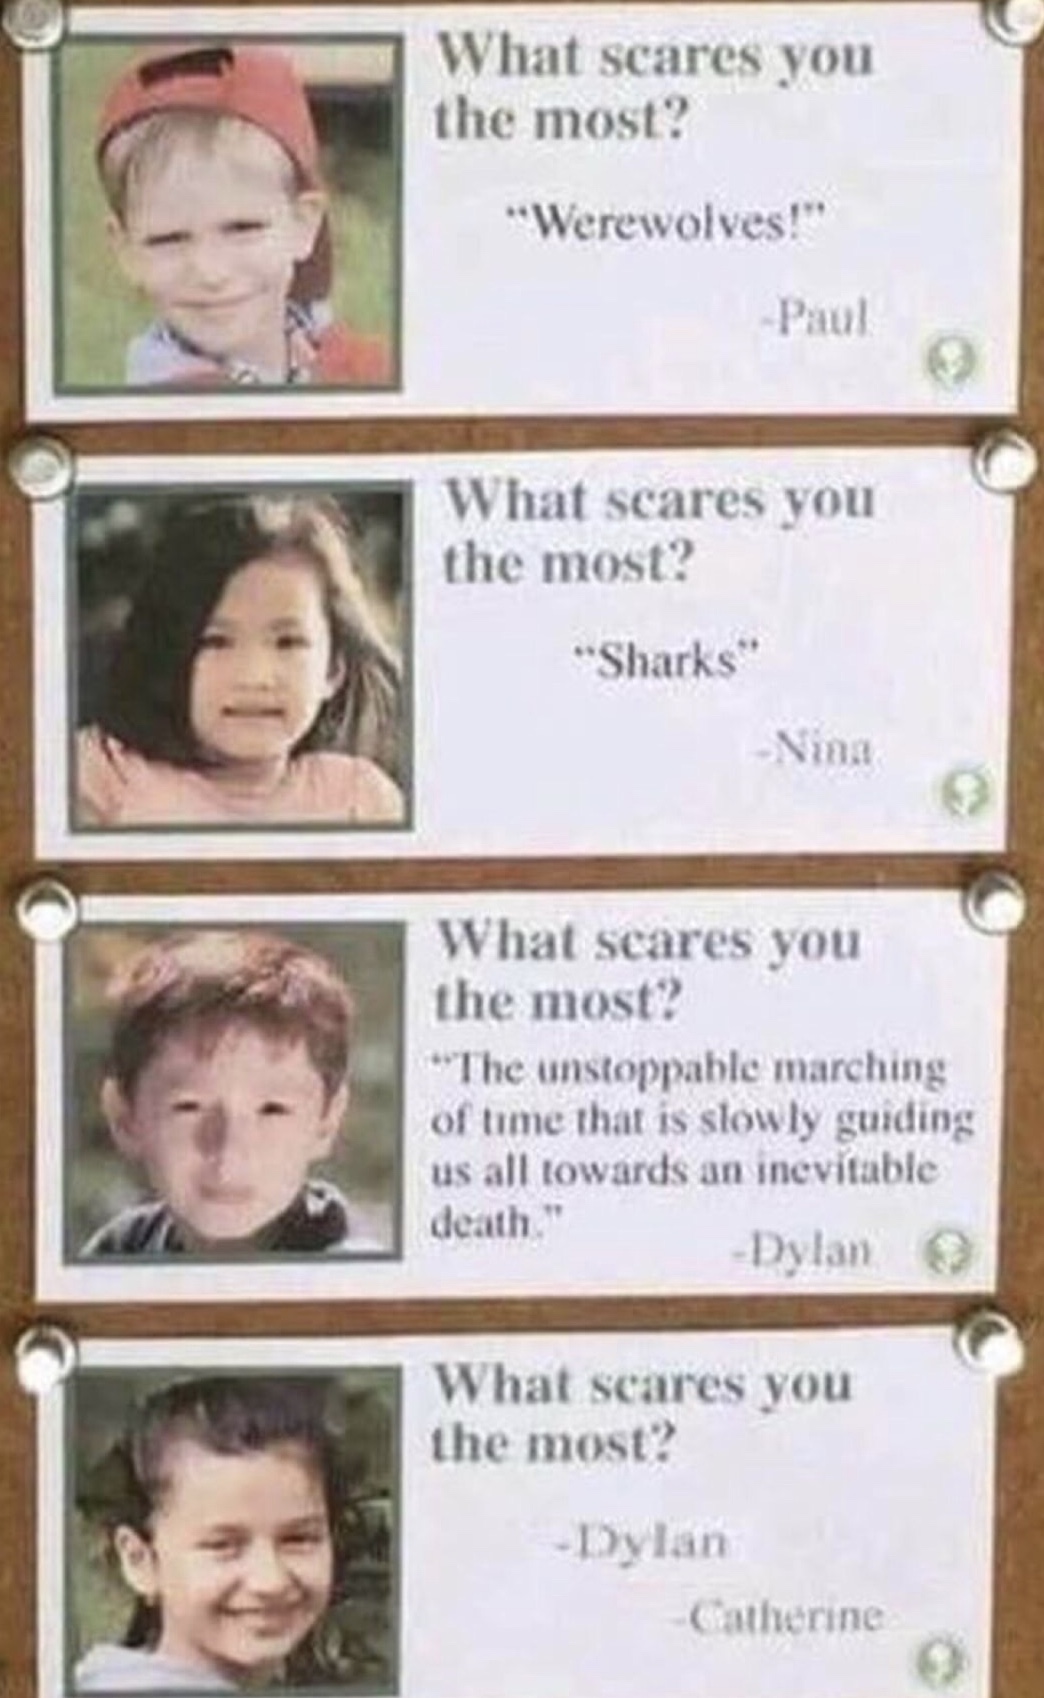 dank scares you the most meme - What scares you the most? "Werewolves!" Paul What scares you the most? "Sharks Nina What scares you the most? The unstoppable marching of time that is slowly guiding us all towards an inevitable death." Dylan What scares yo